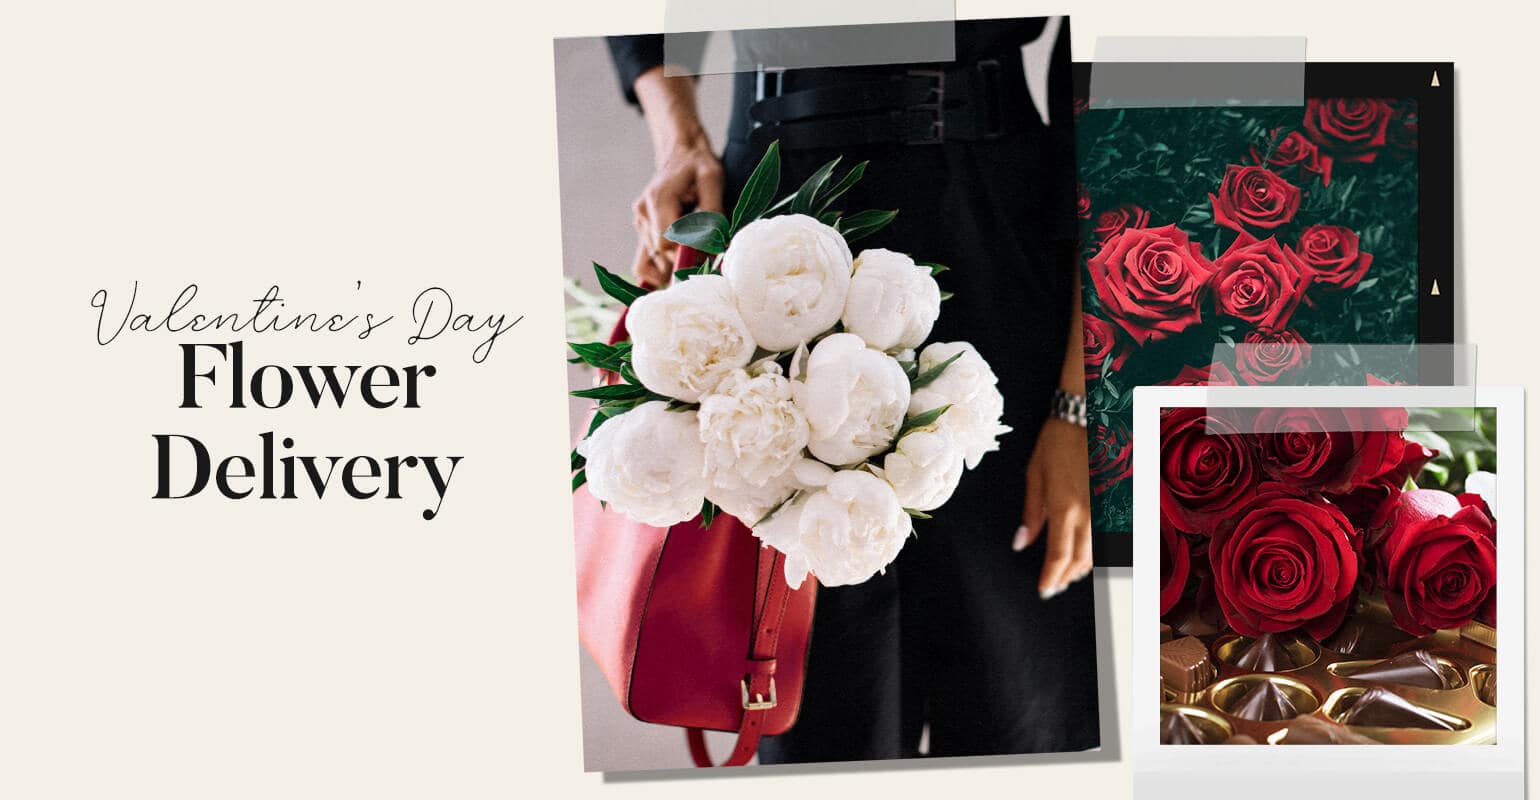 11 Valentine’s Day Flower Delivery to Send Your Love ASAP